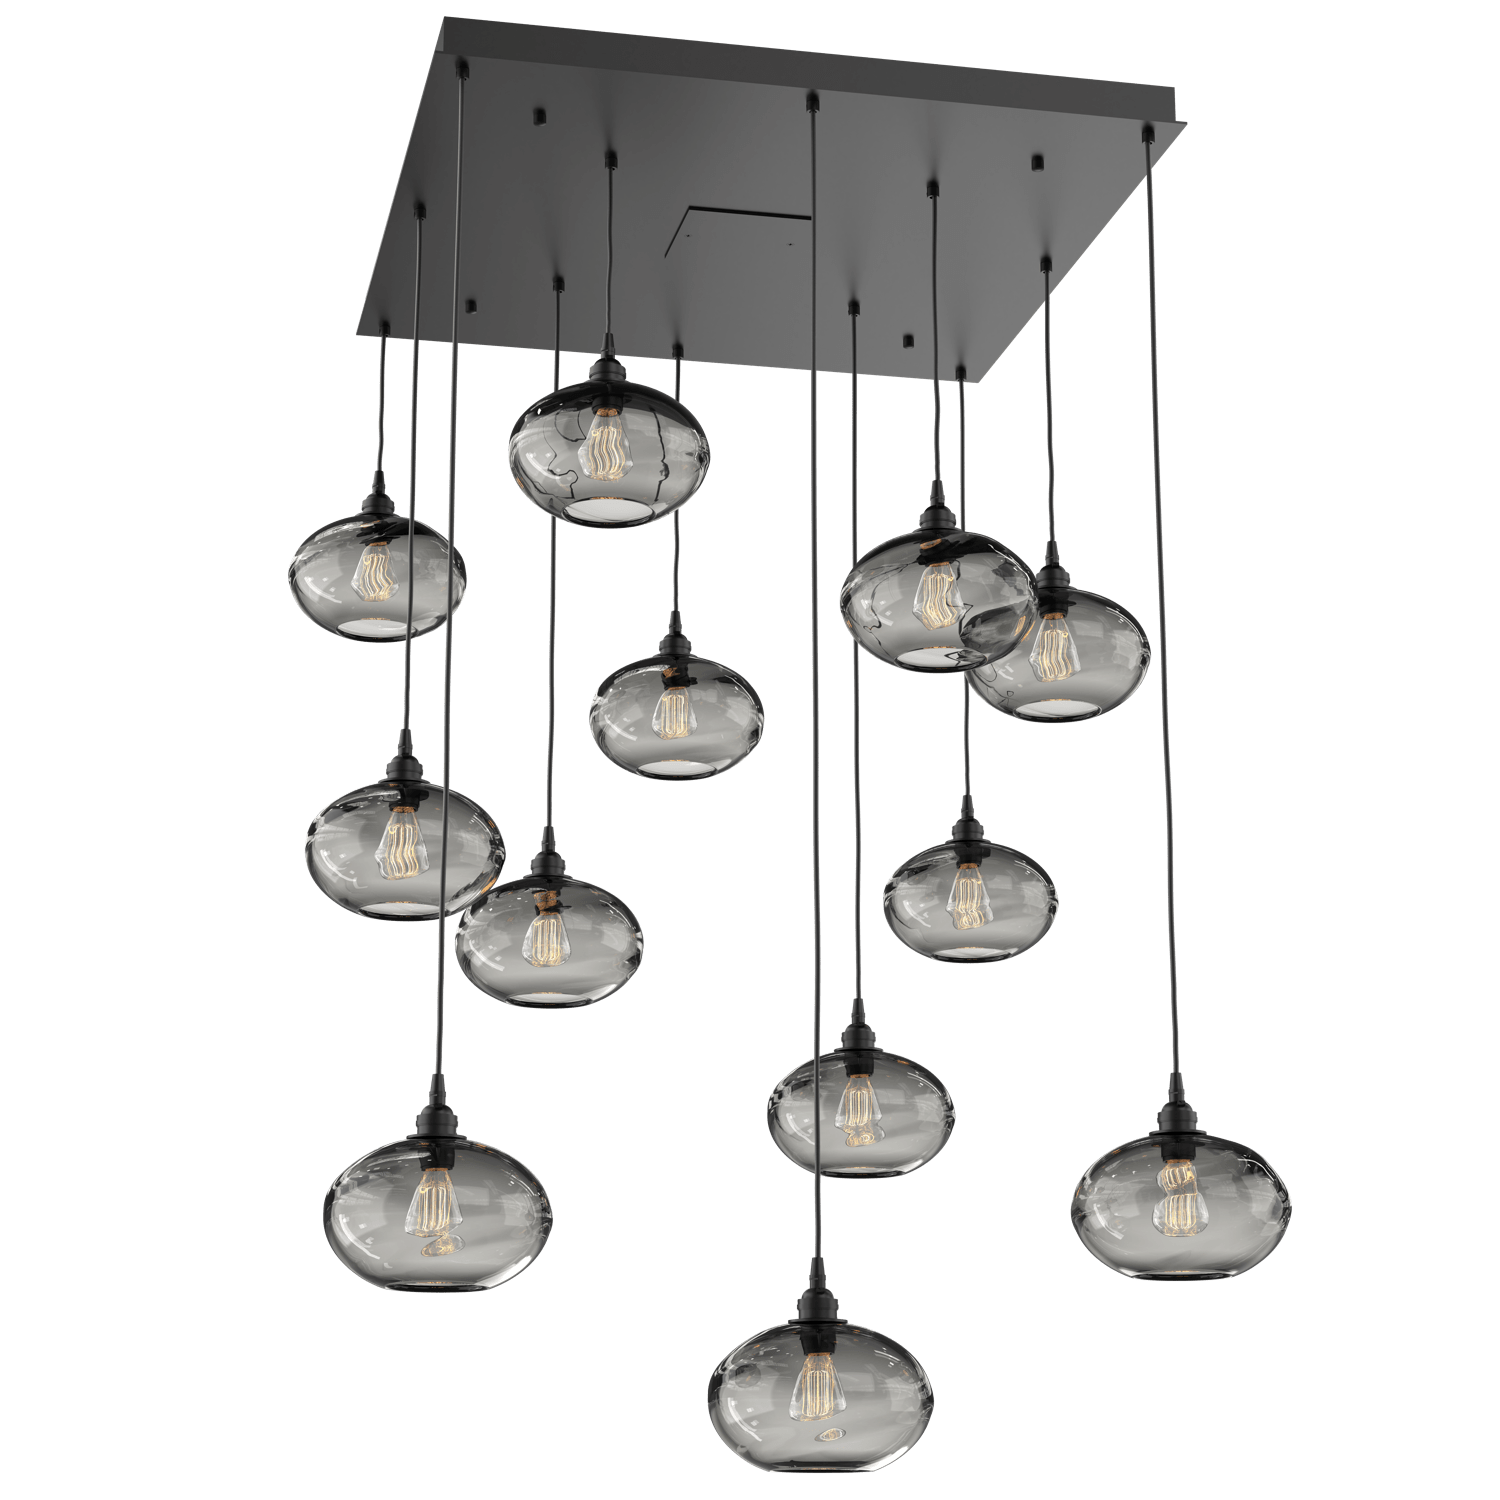 CHB0036-12-MB-OS-Hammerton-Studio-Optic-Blown-Glass-Coppa-12-light-square-pendant-chandelier-with-matte-black-finish-and-optic-smoke-blown-glass-shades-and-incandescent-lamping